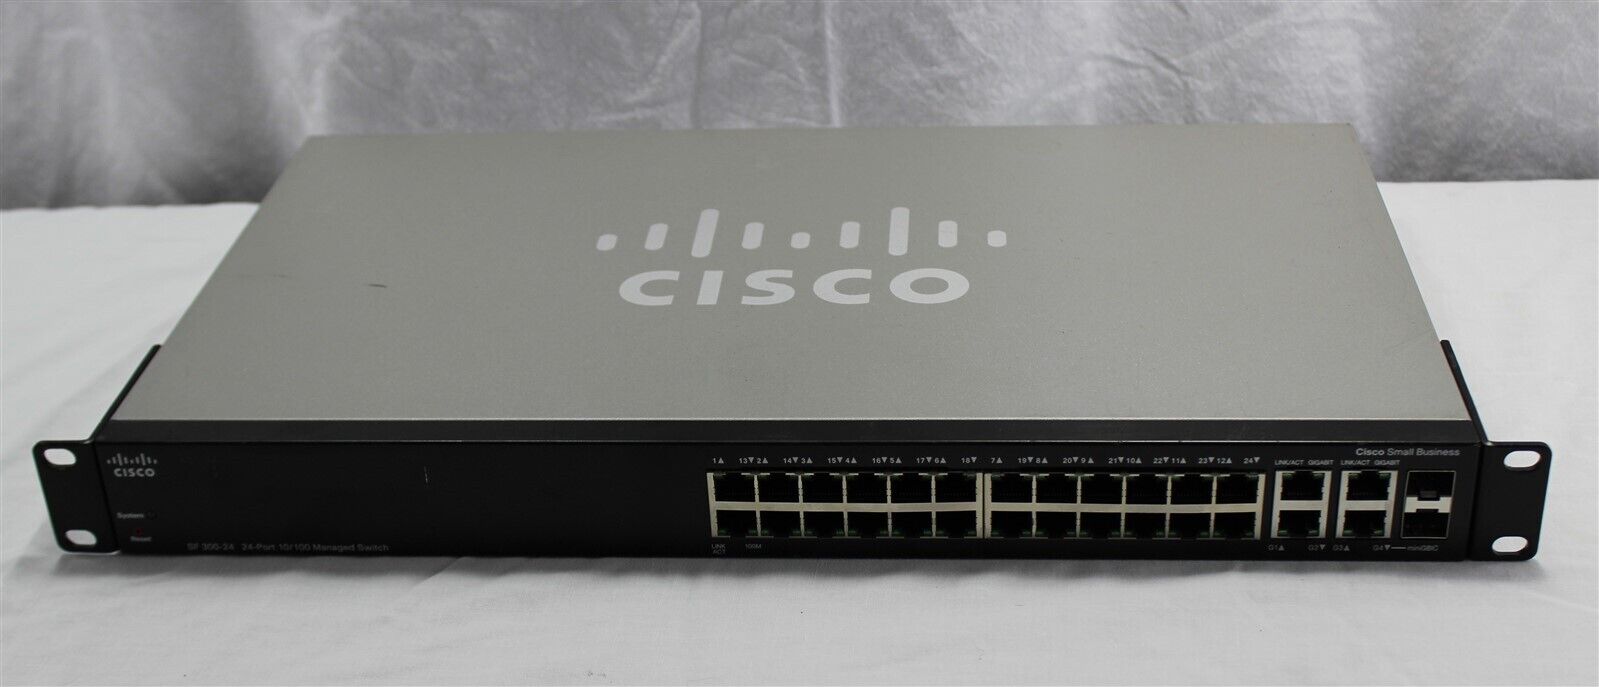 Cisco Model SF300-24 Network PoE Managed Switch - Tested Works - With AC Cable